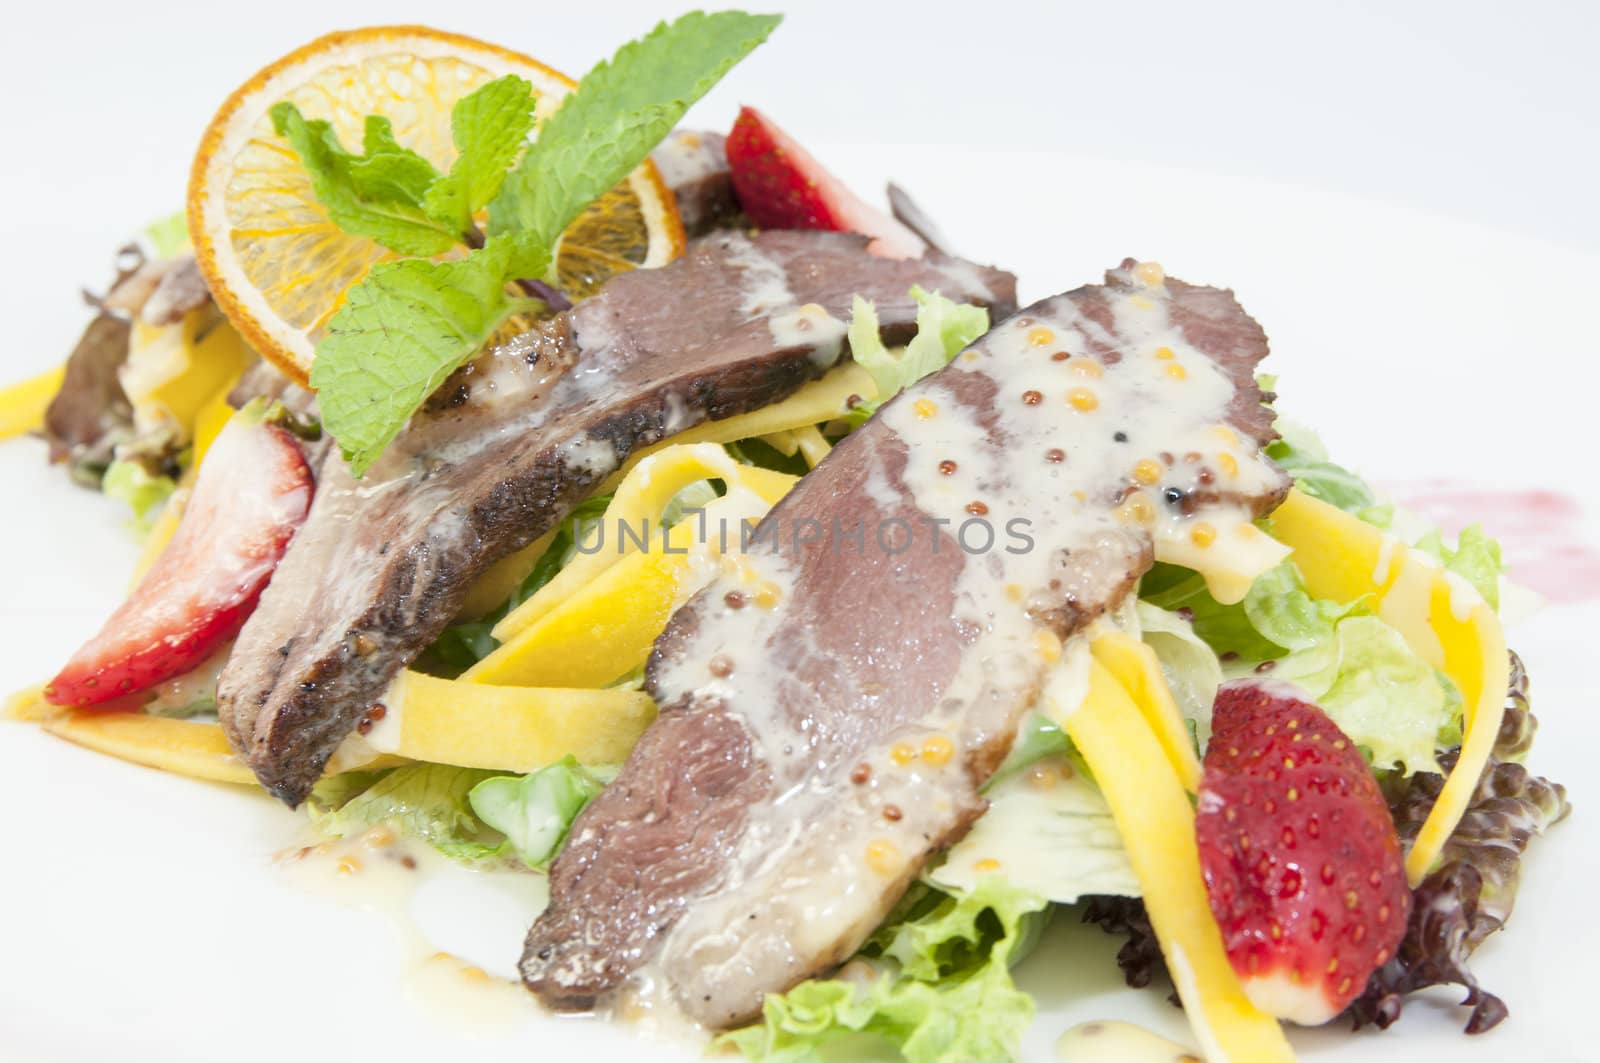 salad of duck meat and vegetables in a restaurant